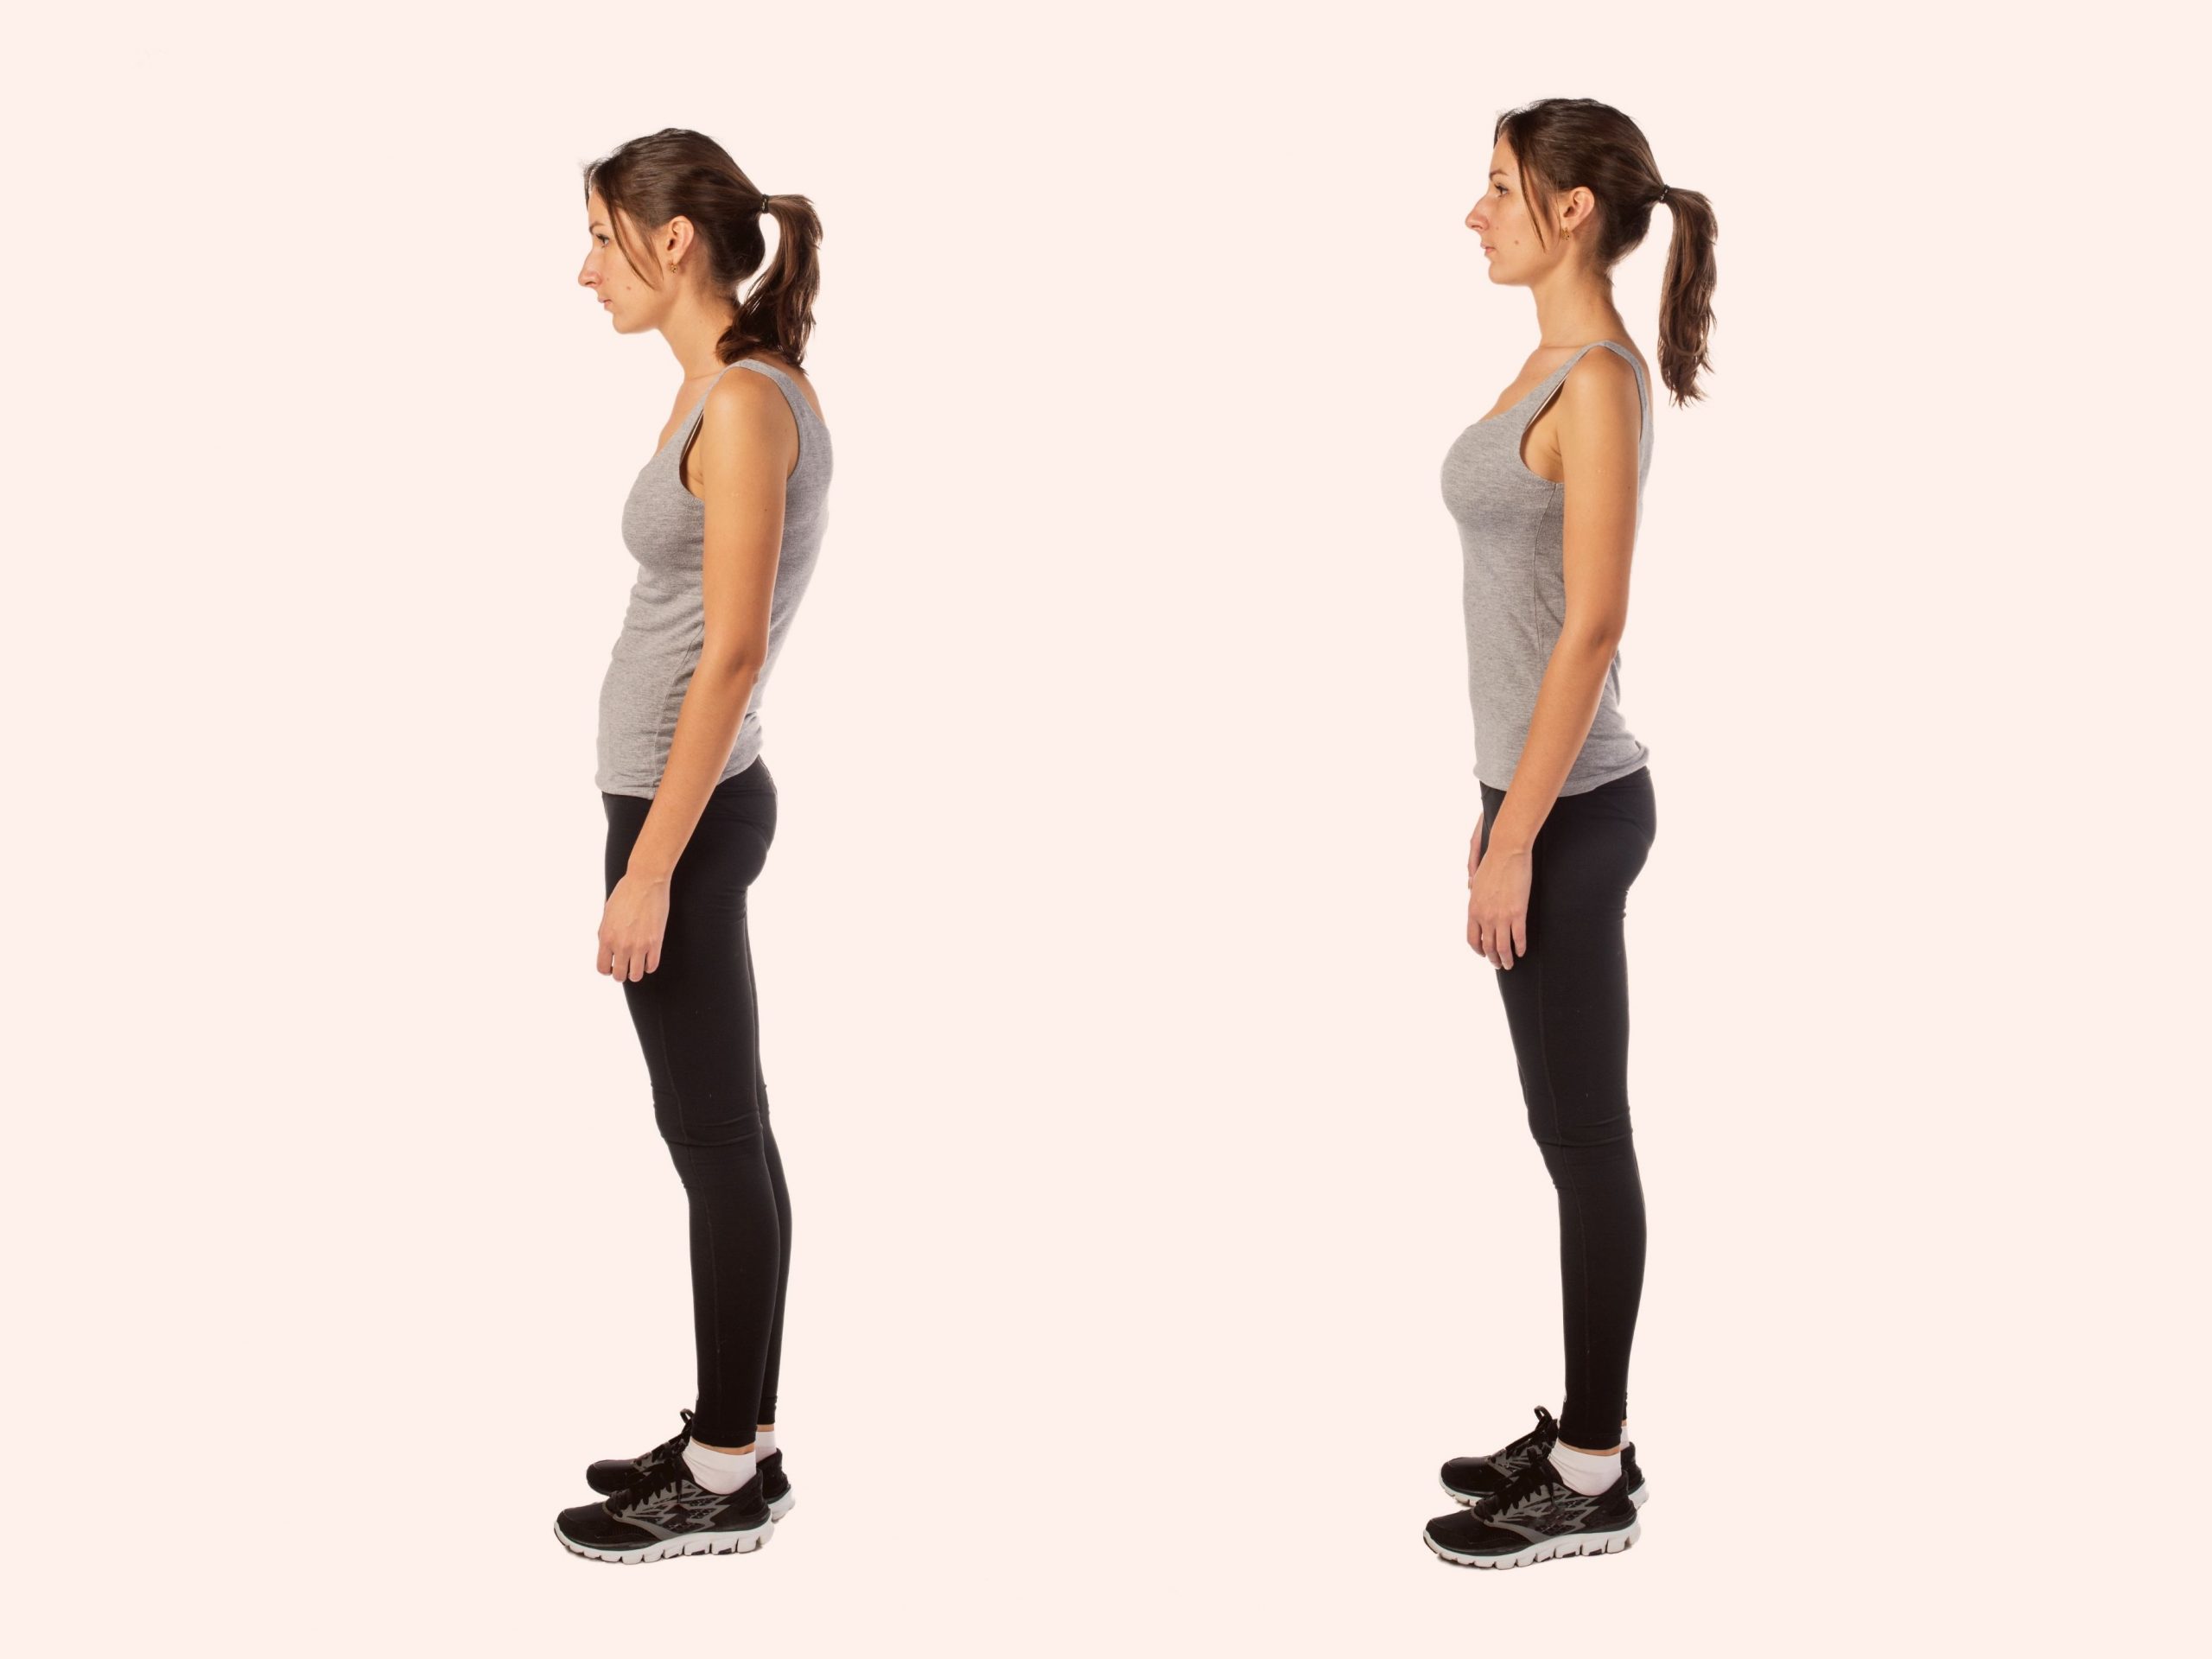 https://pereaclinic.com/wp-content/uploads/2018/09/Poor-posture-1-scaled.jpg